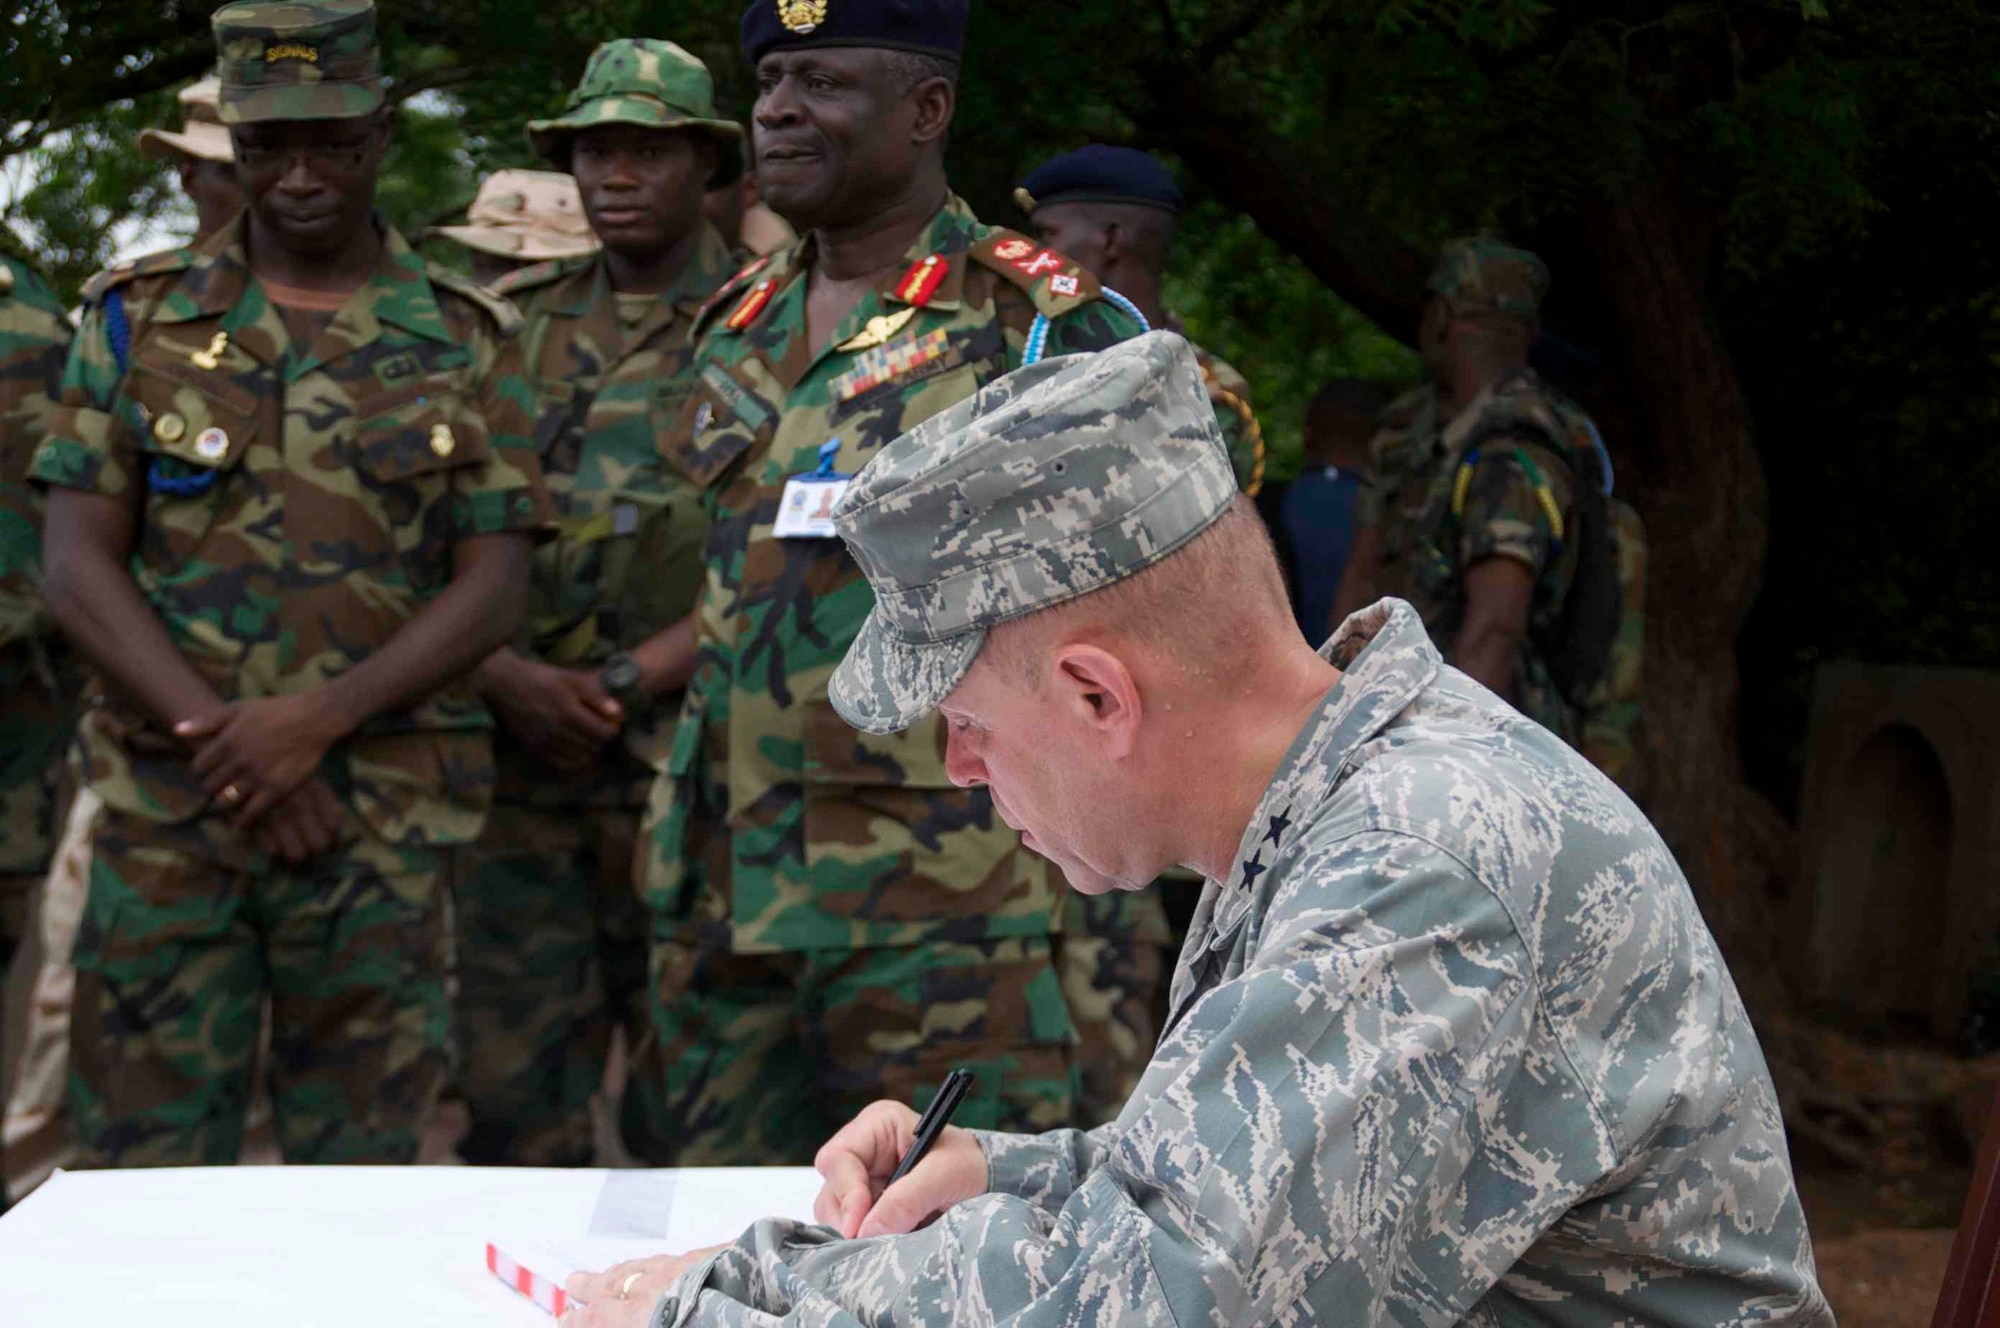 Maj. Gen. Eric Vollmecke, Western Accord 13 deputy exercise director, signs the distinguished visitors log while touring the Bundase training camp near Accra, Ghana, June 19. Western Accord 13 is a mutually beneficial exercise hosted by U.S. Army Africa that brings together the Economic Community of West African States and the US Army to have increased capabilities to support regional peacekeeping operations. (Photos by: Sgt. Tyler Sletten, 116th Public Affairs Detachment)